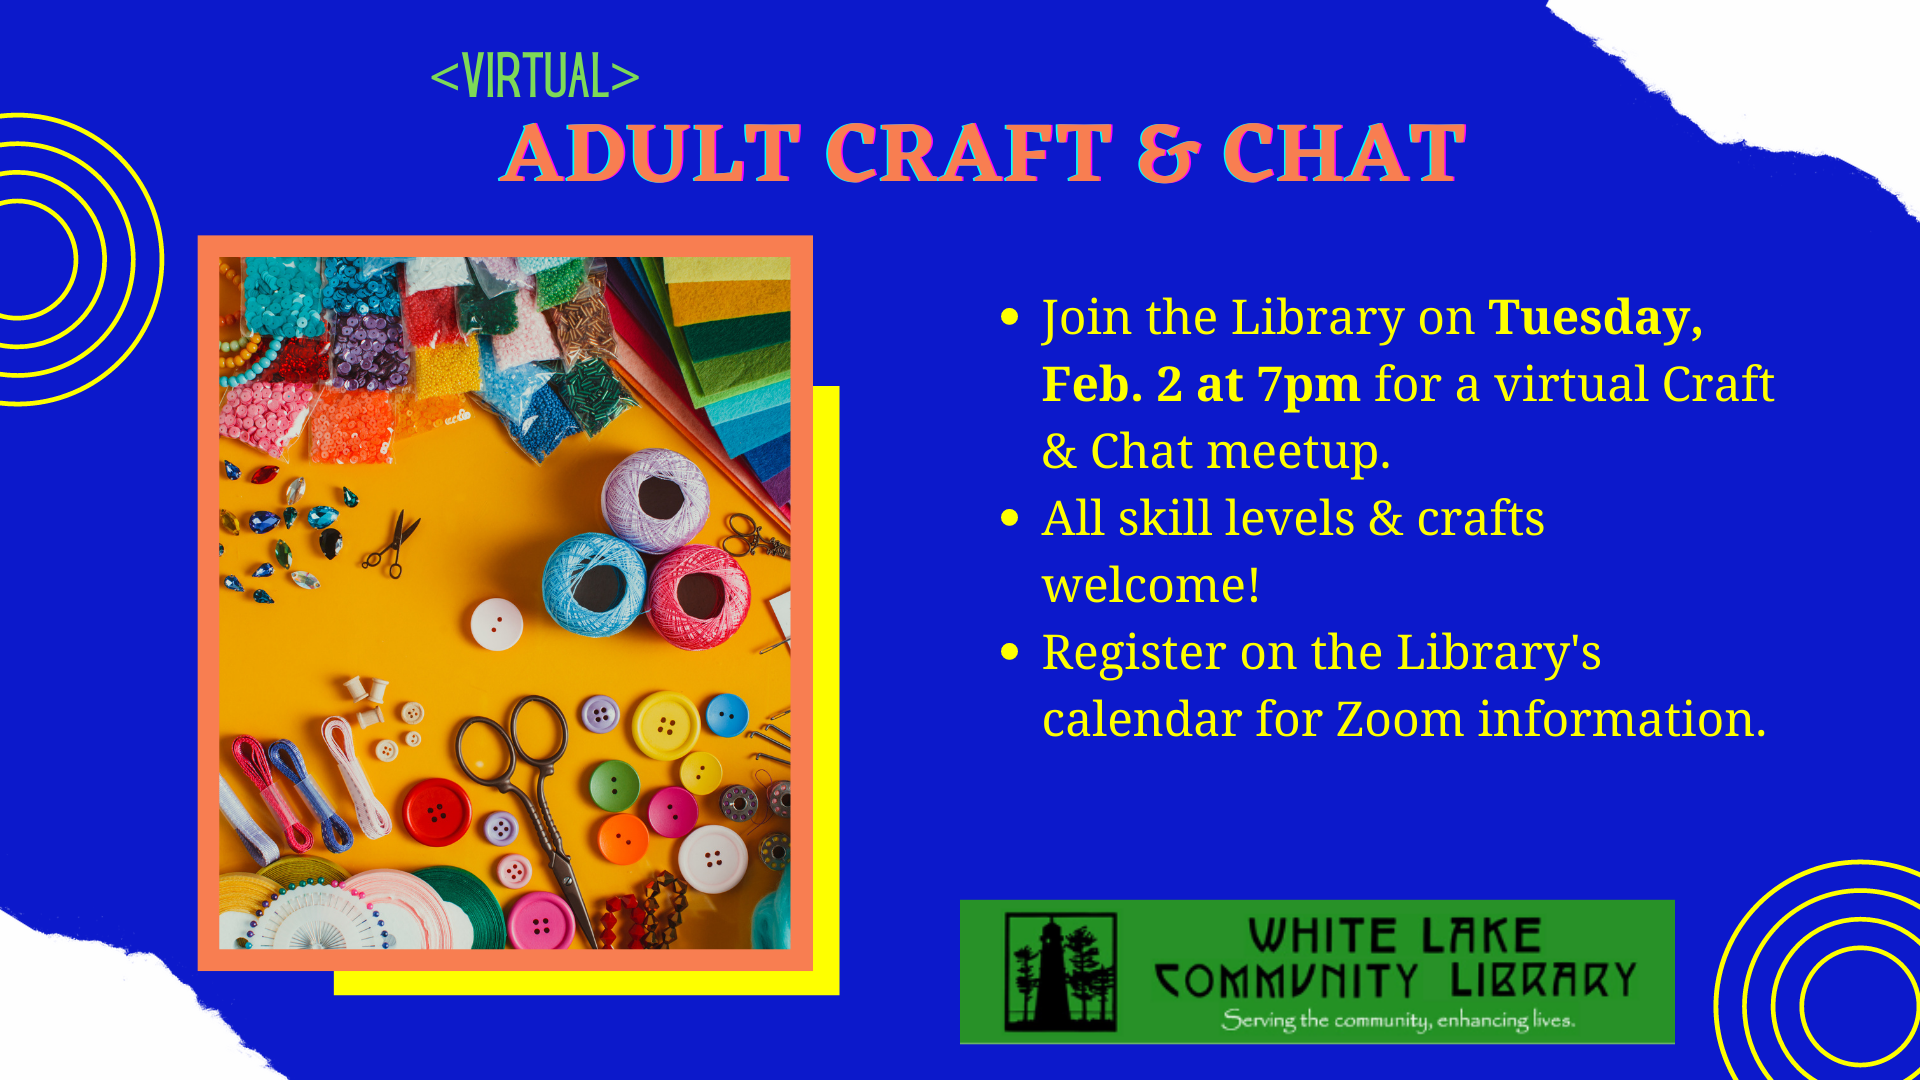 Adult Craft & Chat February